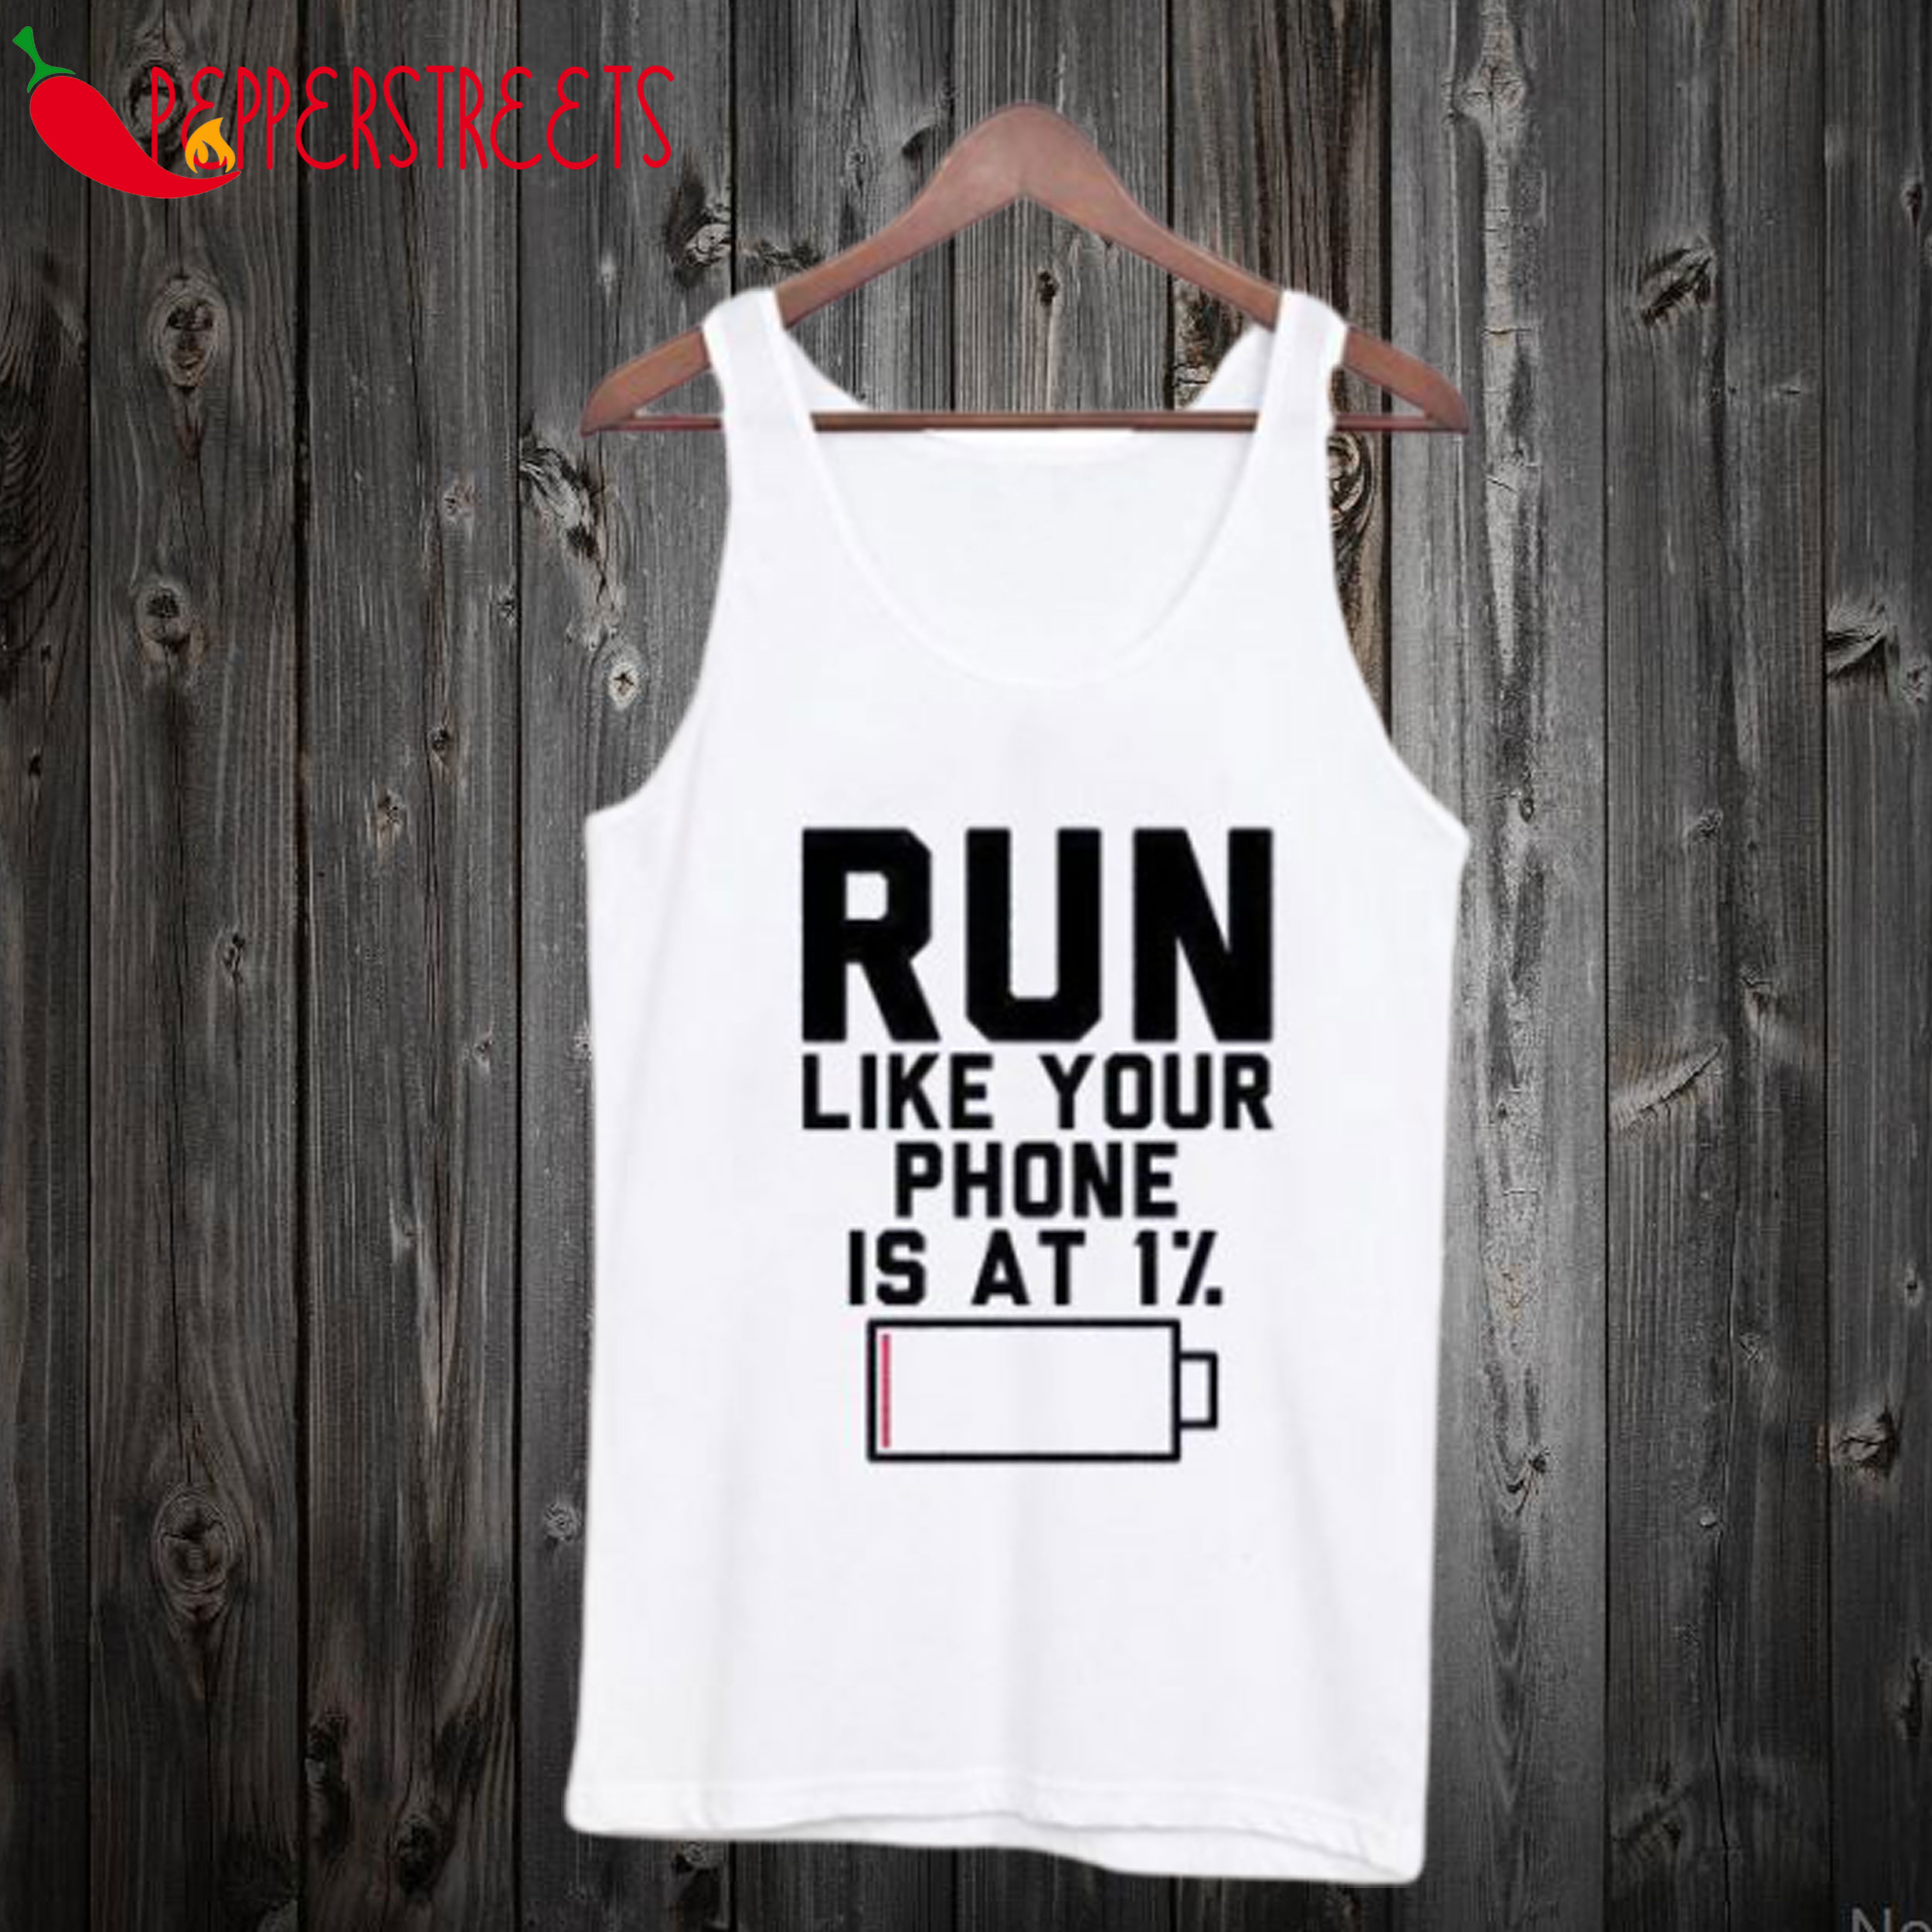 Run Like Your Phone Is At 1% Tank Top